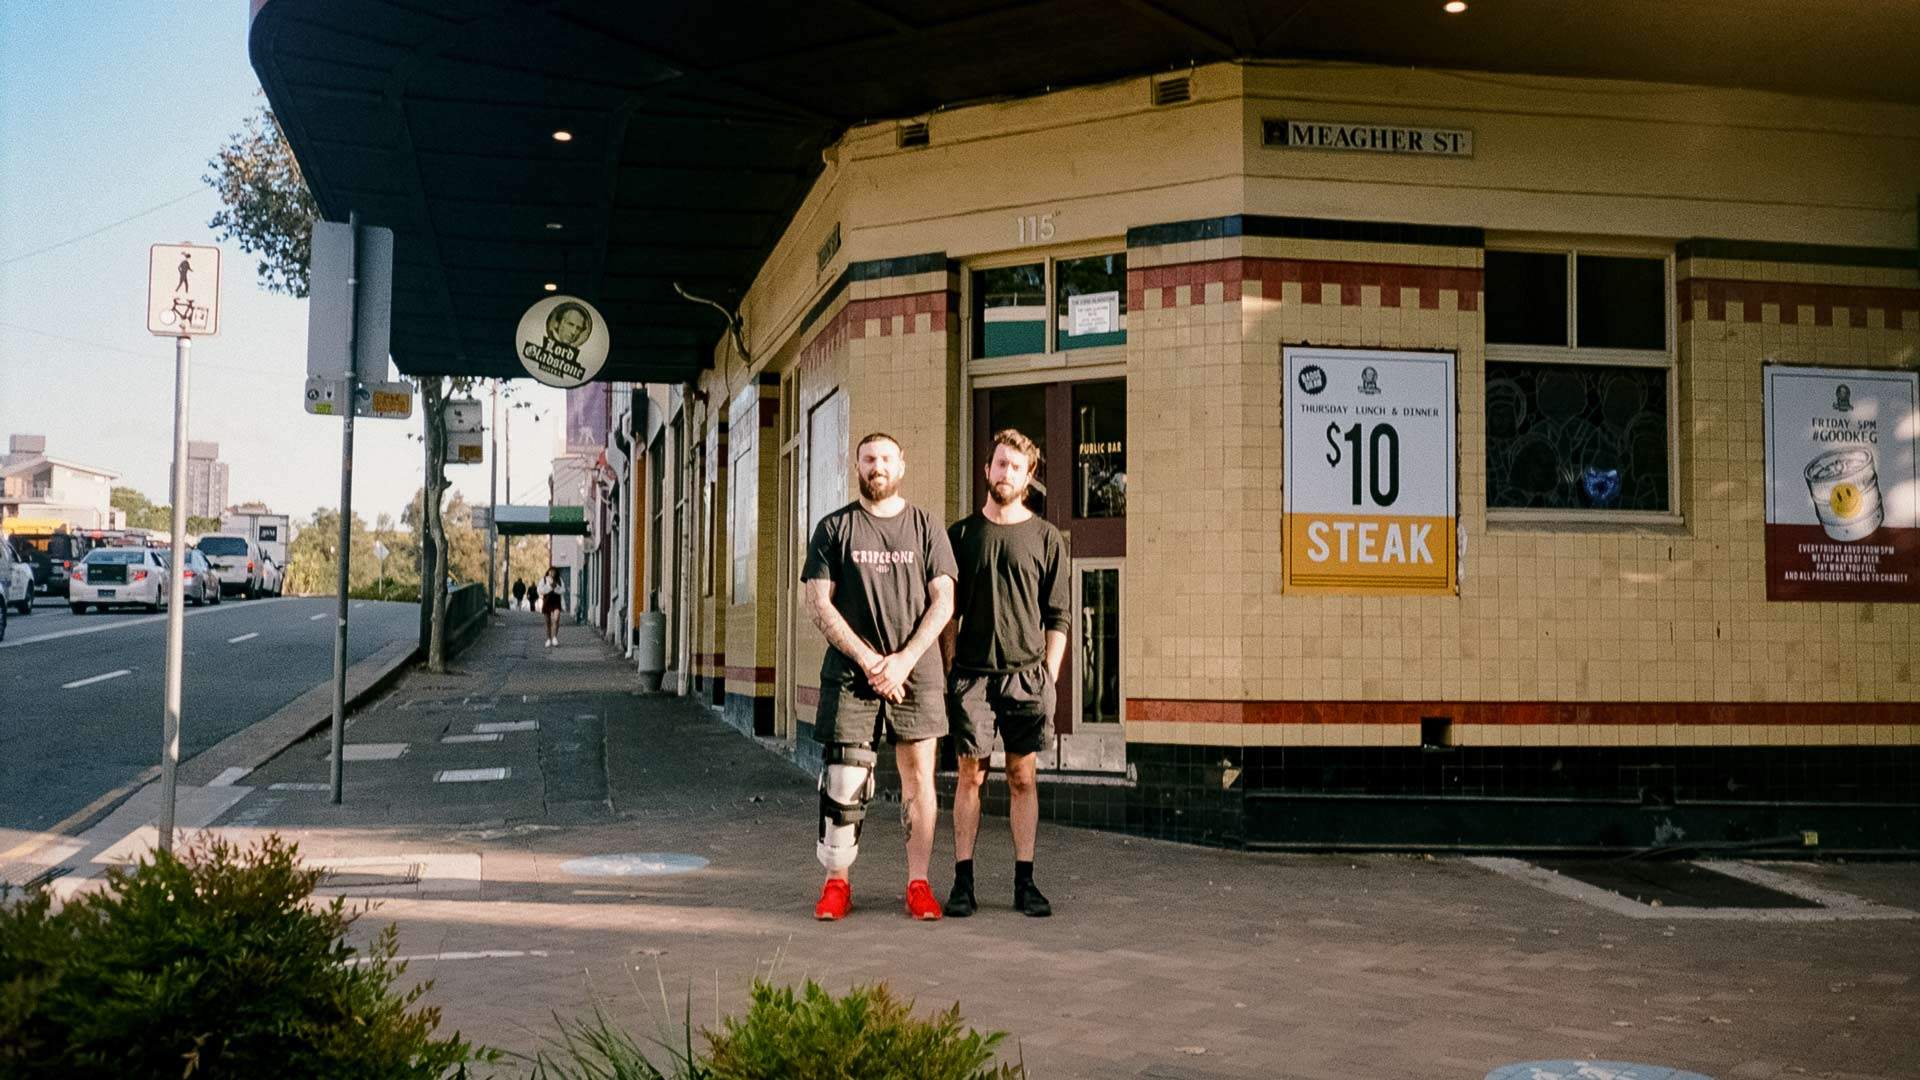 Ben Johnson and Mitch Crum outside their pub The lord Gladstone - one of the best pubs in Sydney.